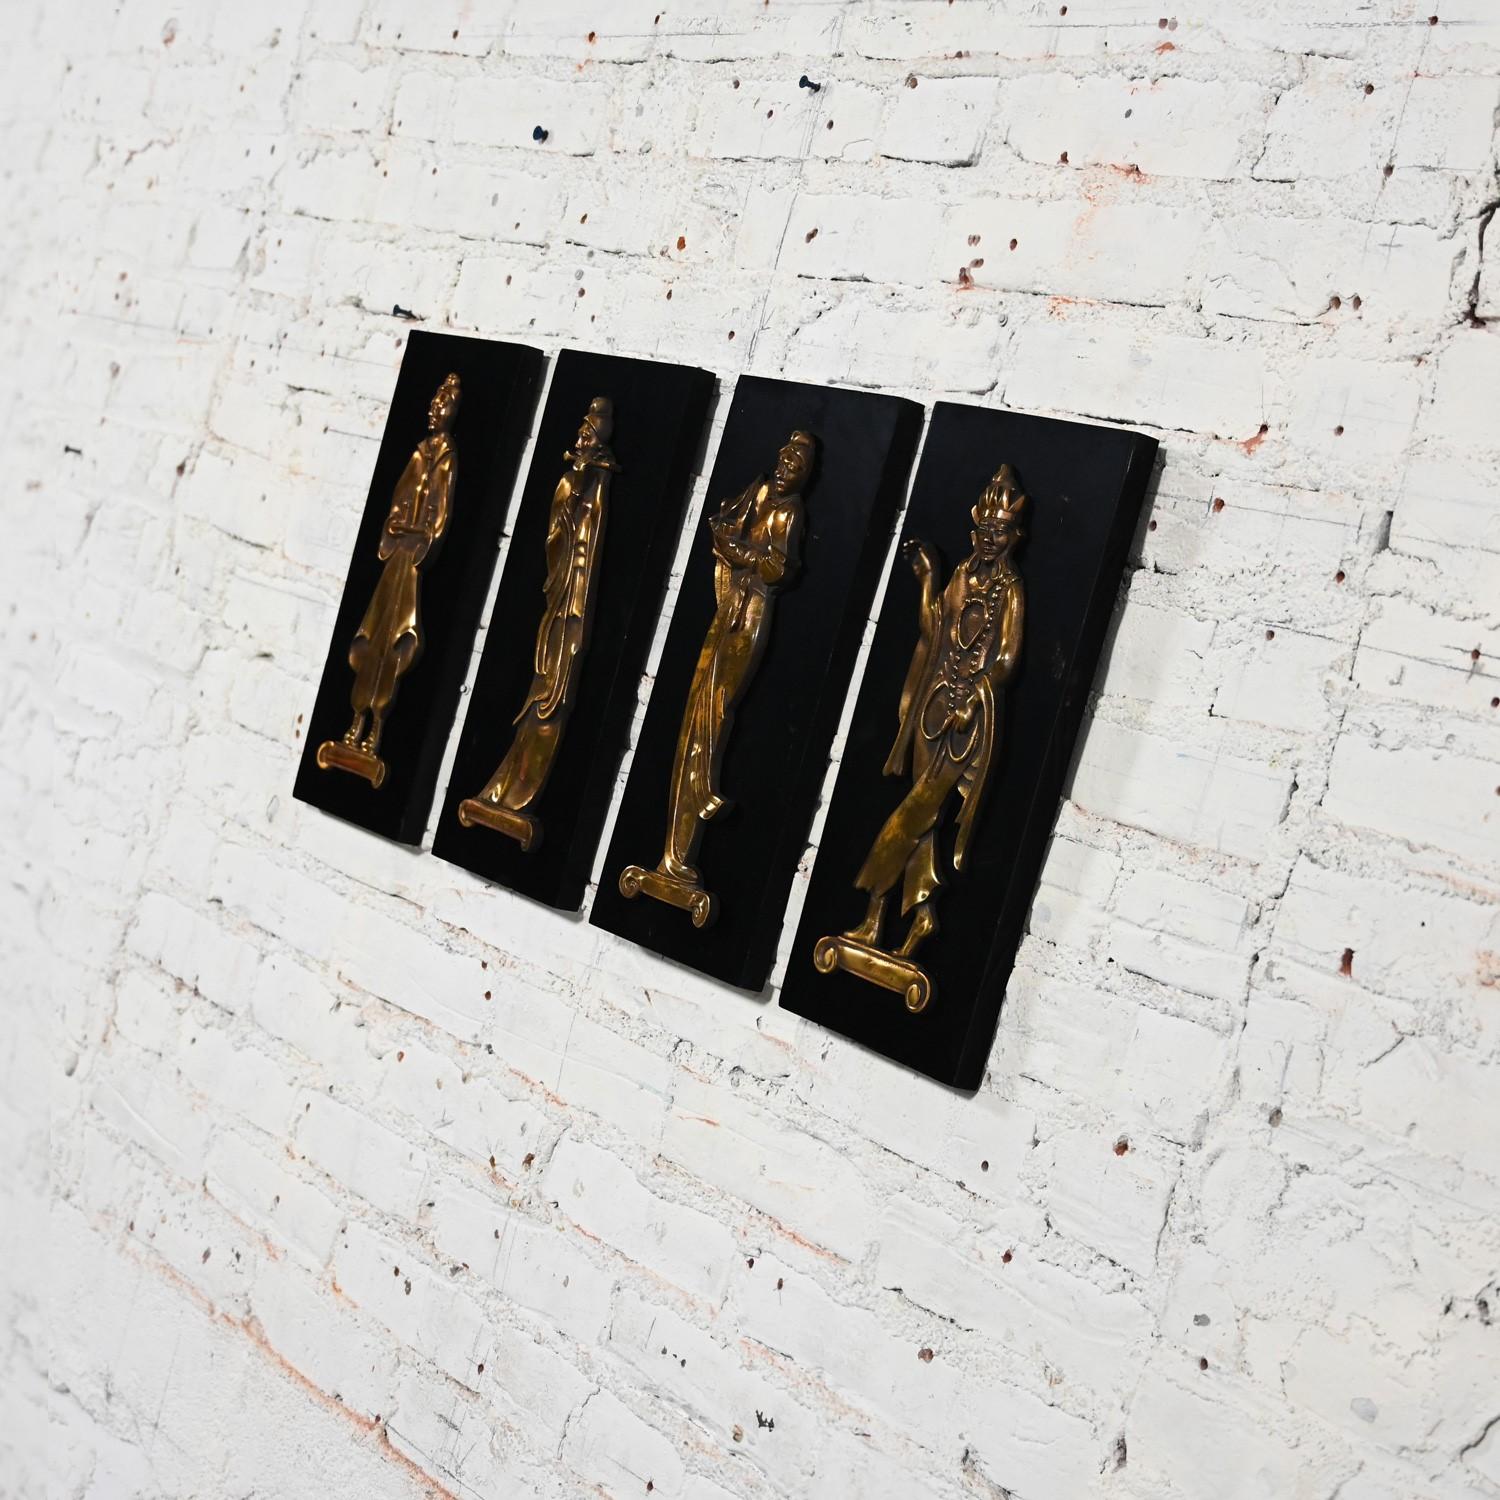 4 Mid-20th Century Asian Cast Bronze Figures on Black Wood Plaques Signed Gansu For Sale 2